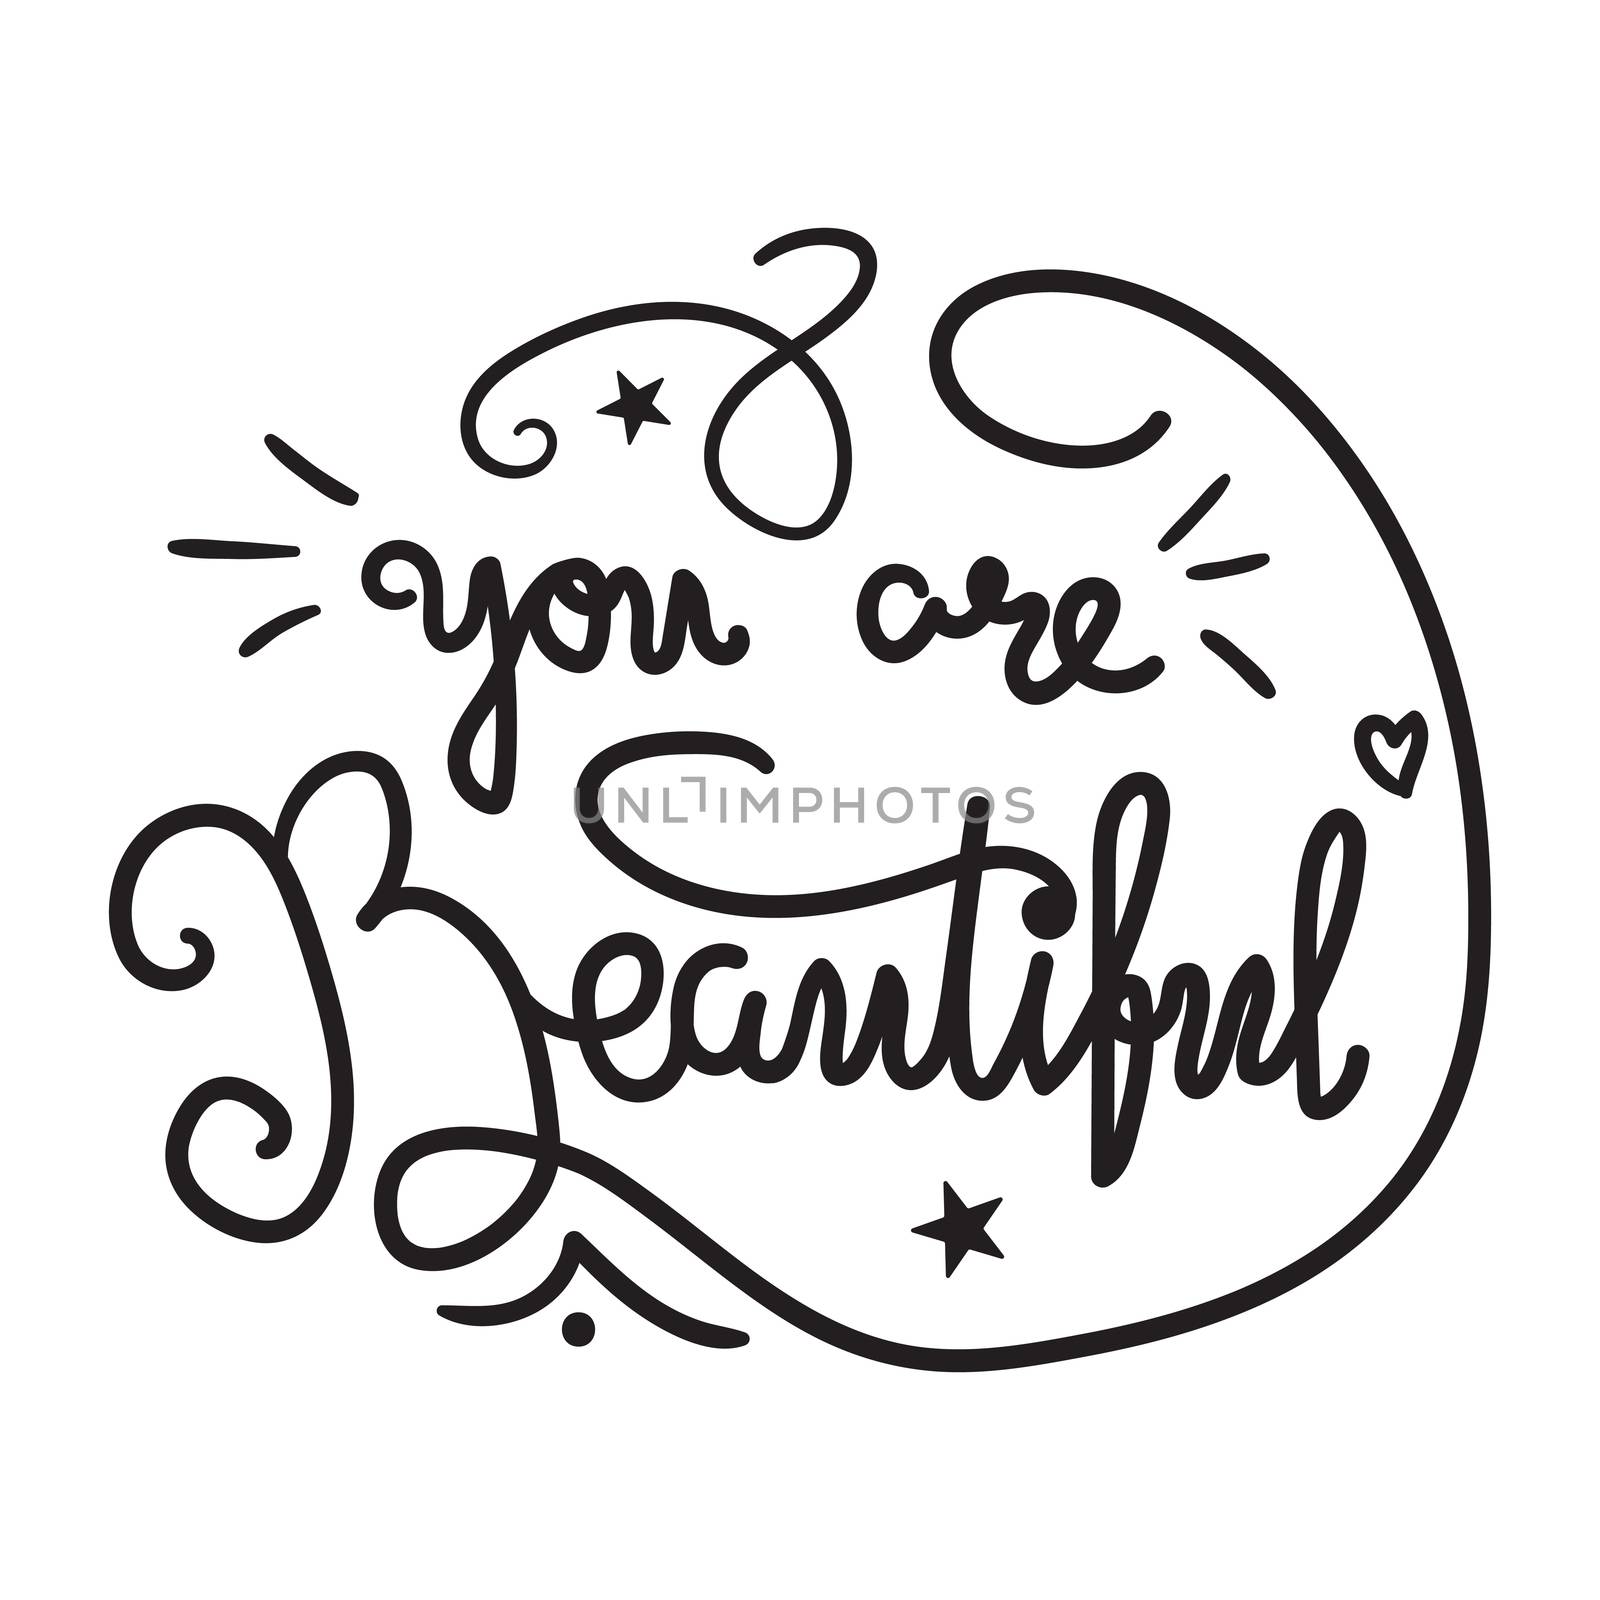 Motivation and Beauty Lettering Concept. You Are Beautiful. Vintage Calligraphic Text. Inspirational retro quote for fabric, print, invitation, decor, greeting card, poster, design element. Vector